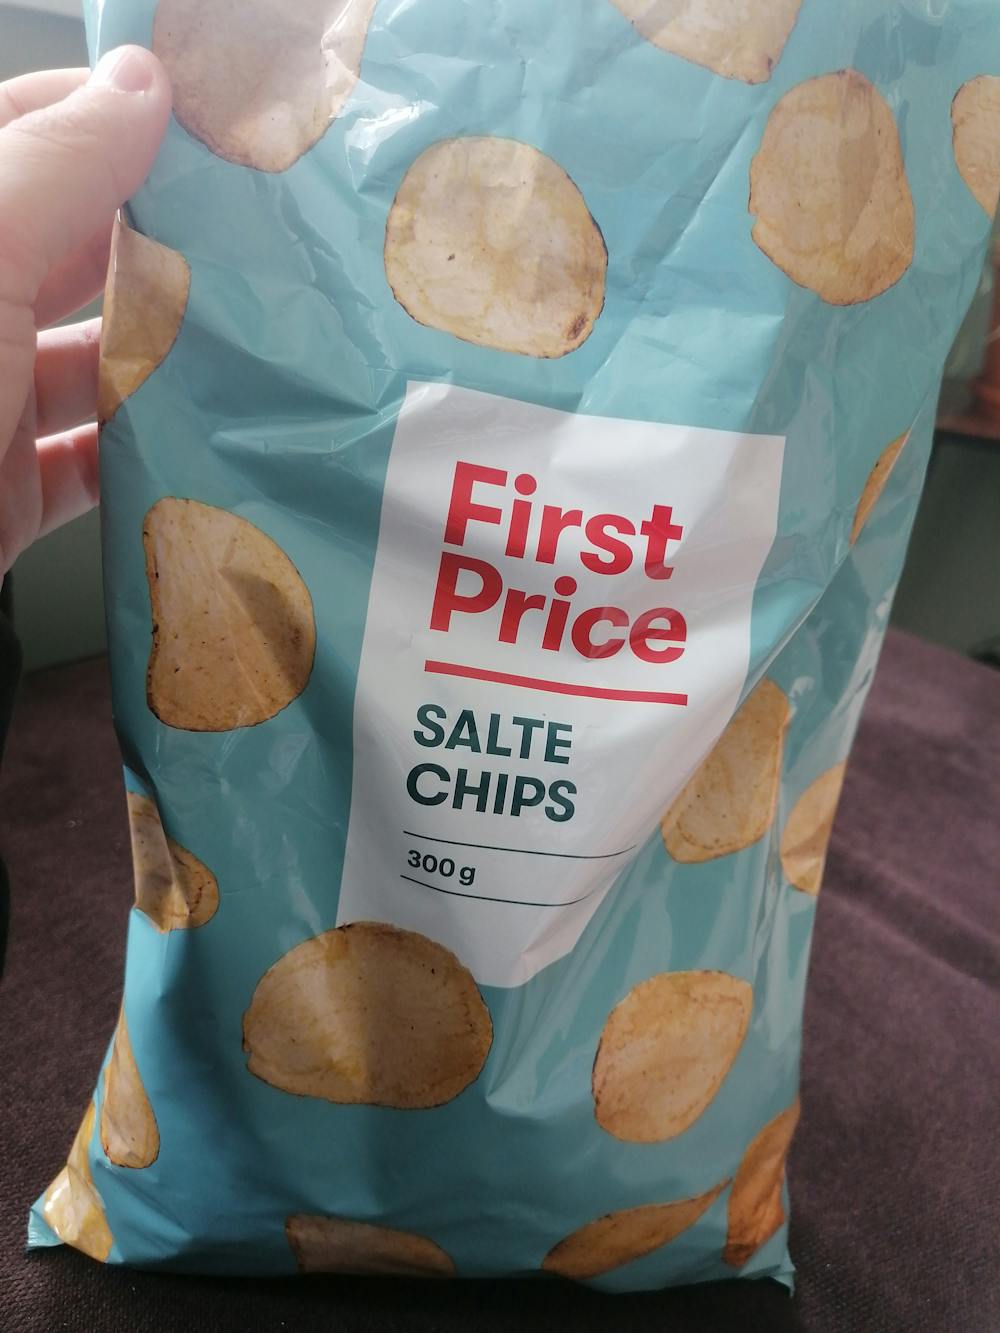 Salte chips , First Price